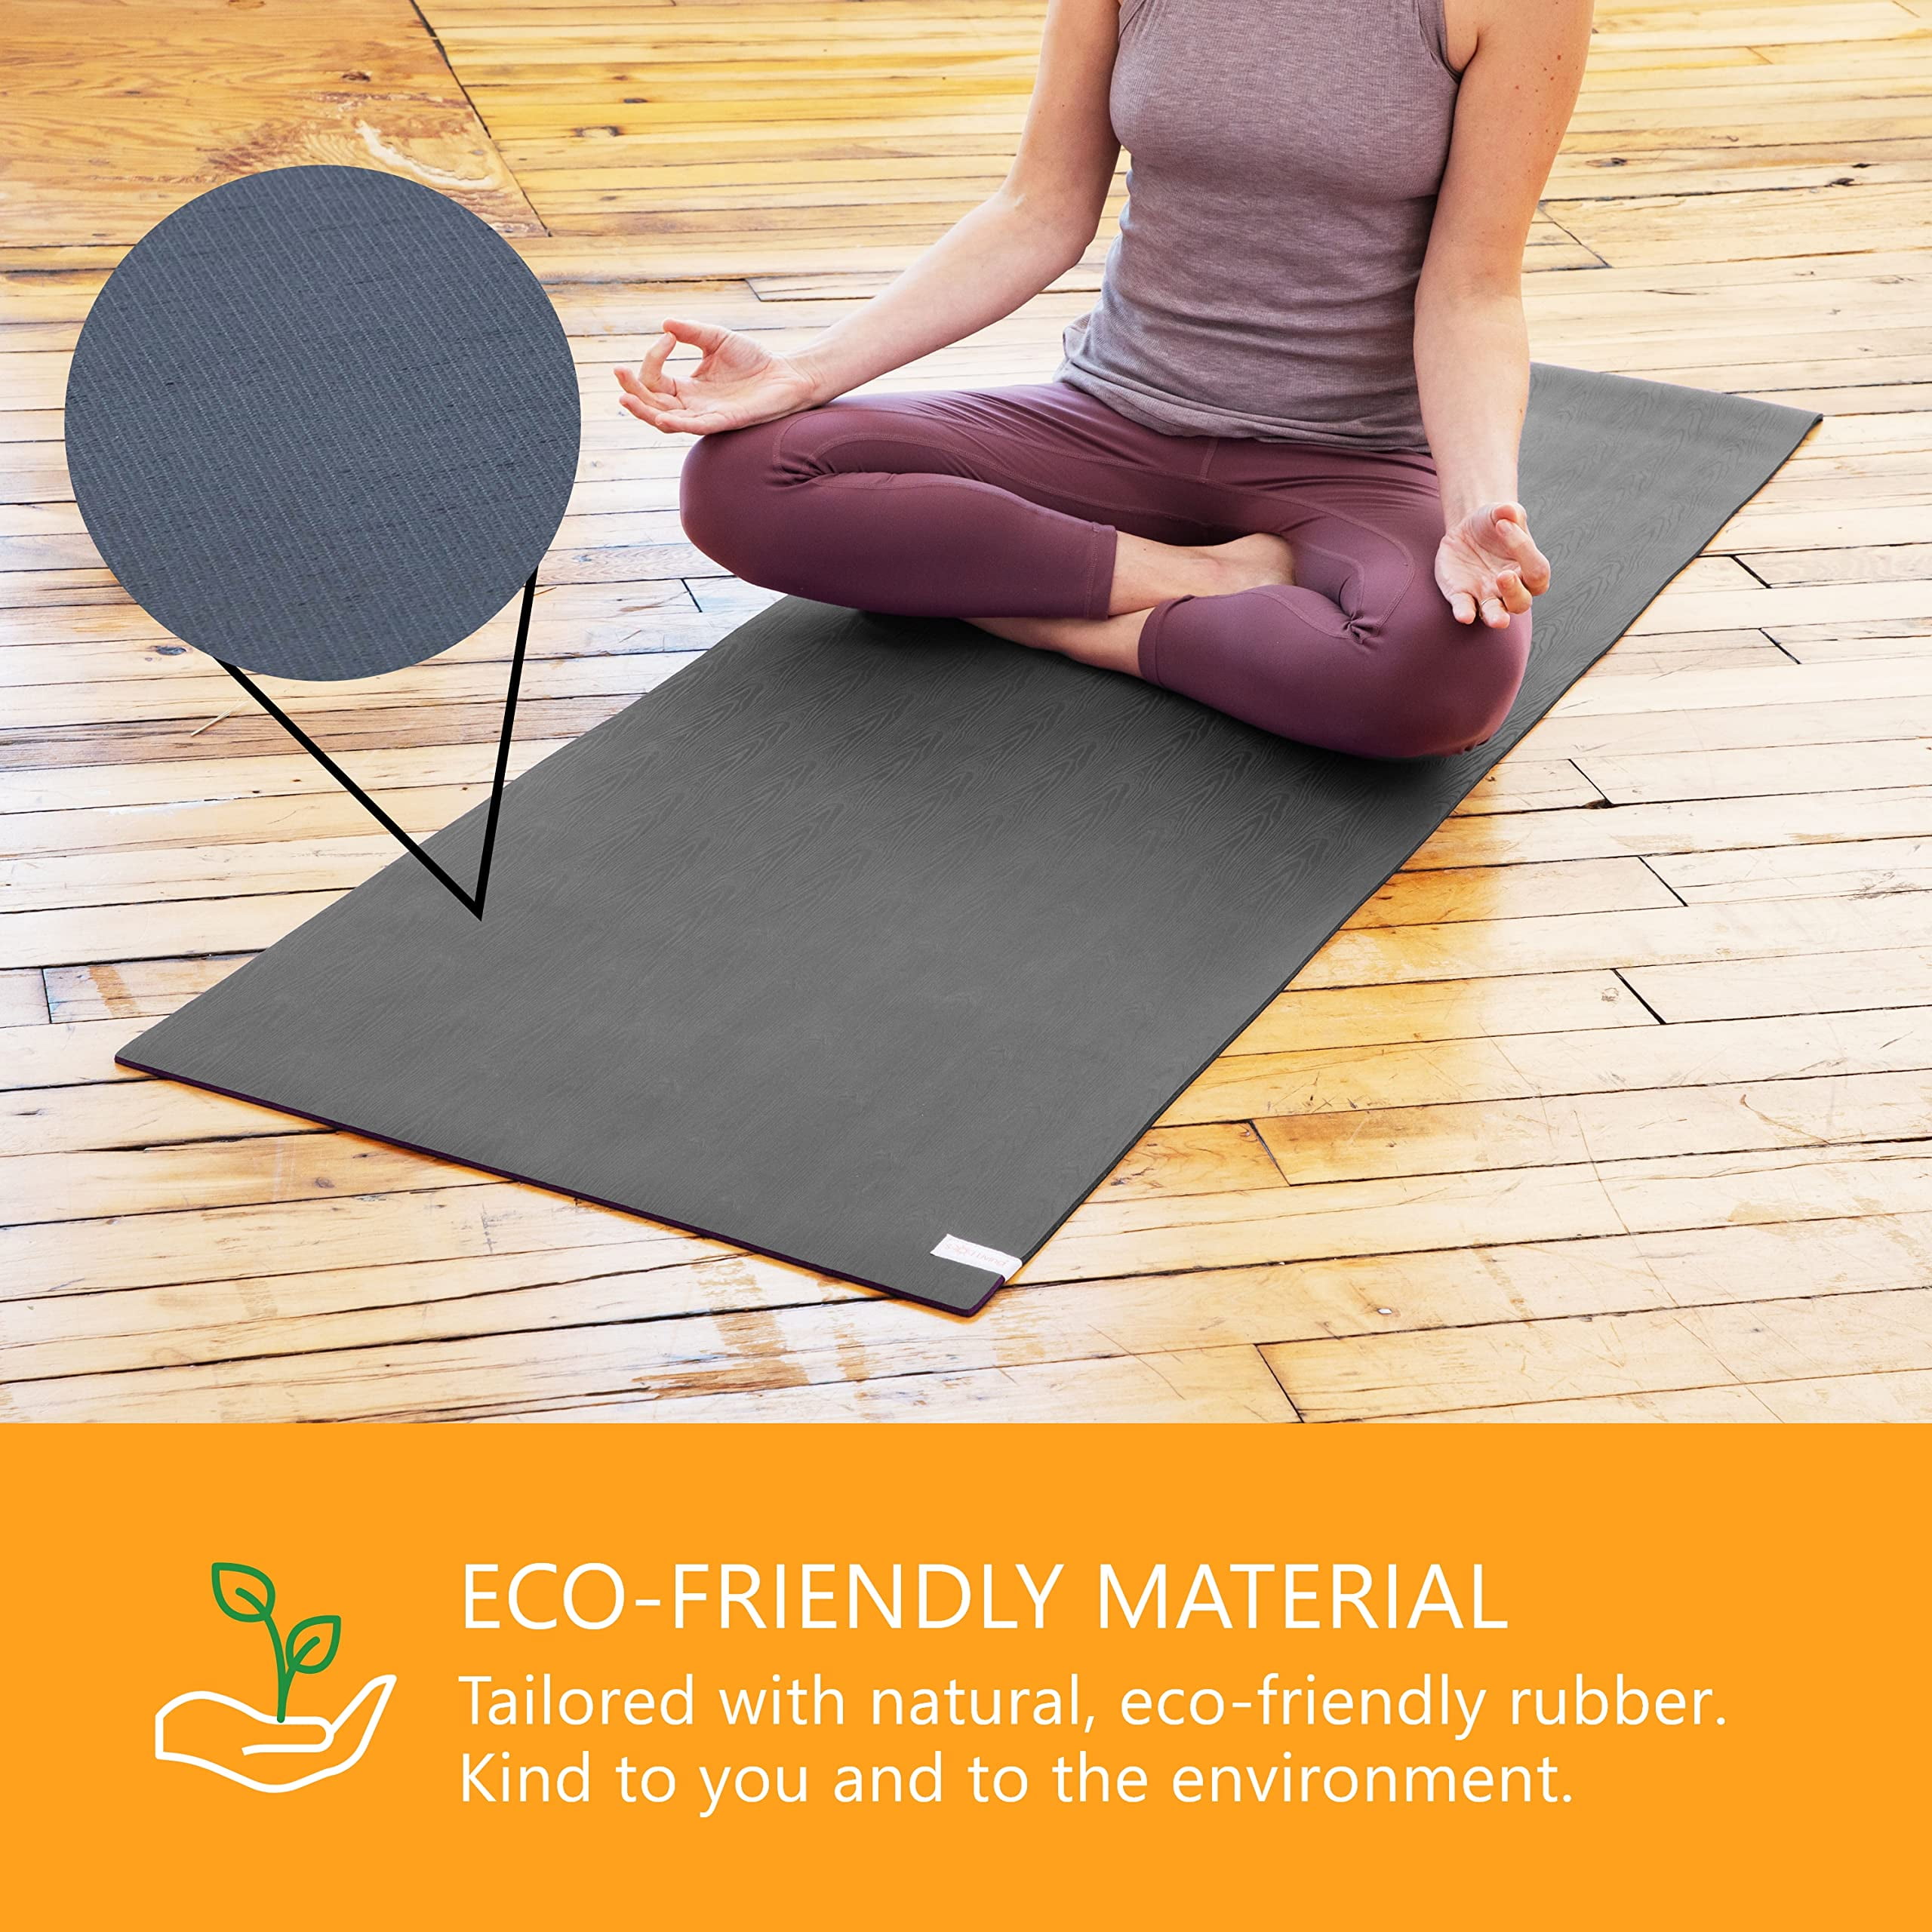 Foldable Natural Rubber Pilates Reformer Mat For Yoga, Meditation, Gym, And  Home Fitness Anti Slip Protection Equipment With Soft Pads T220802 From  Sts_018, $20.66